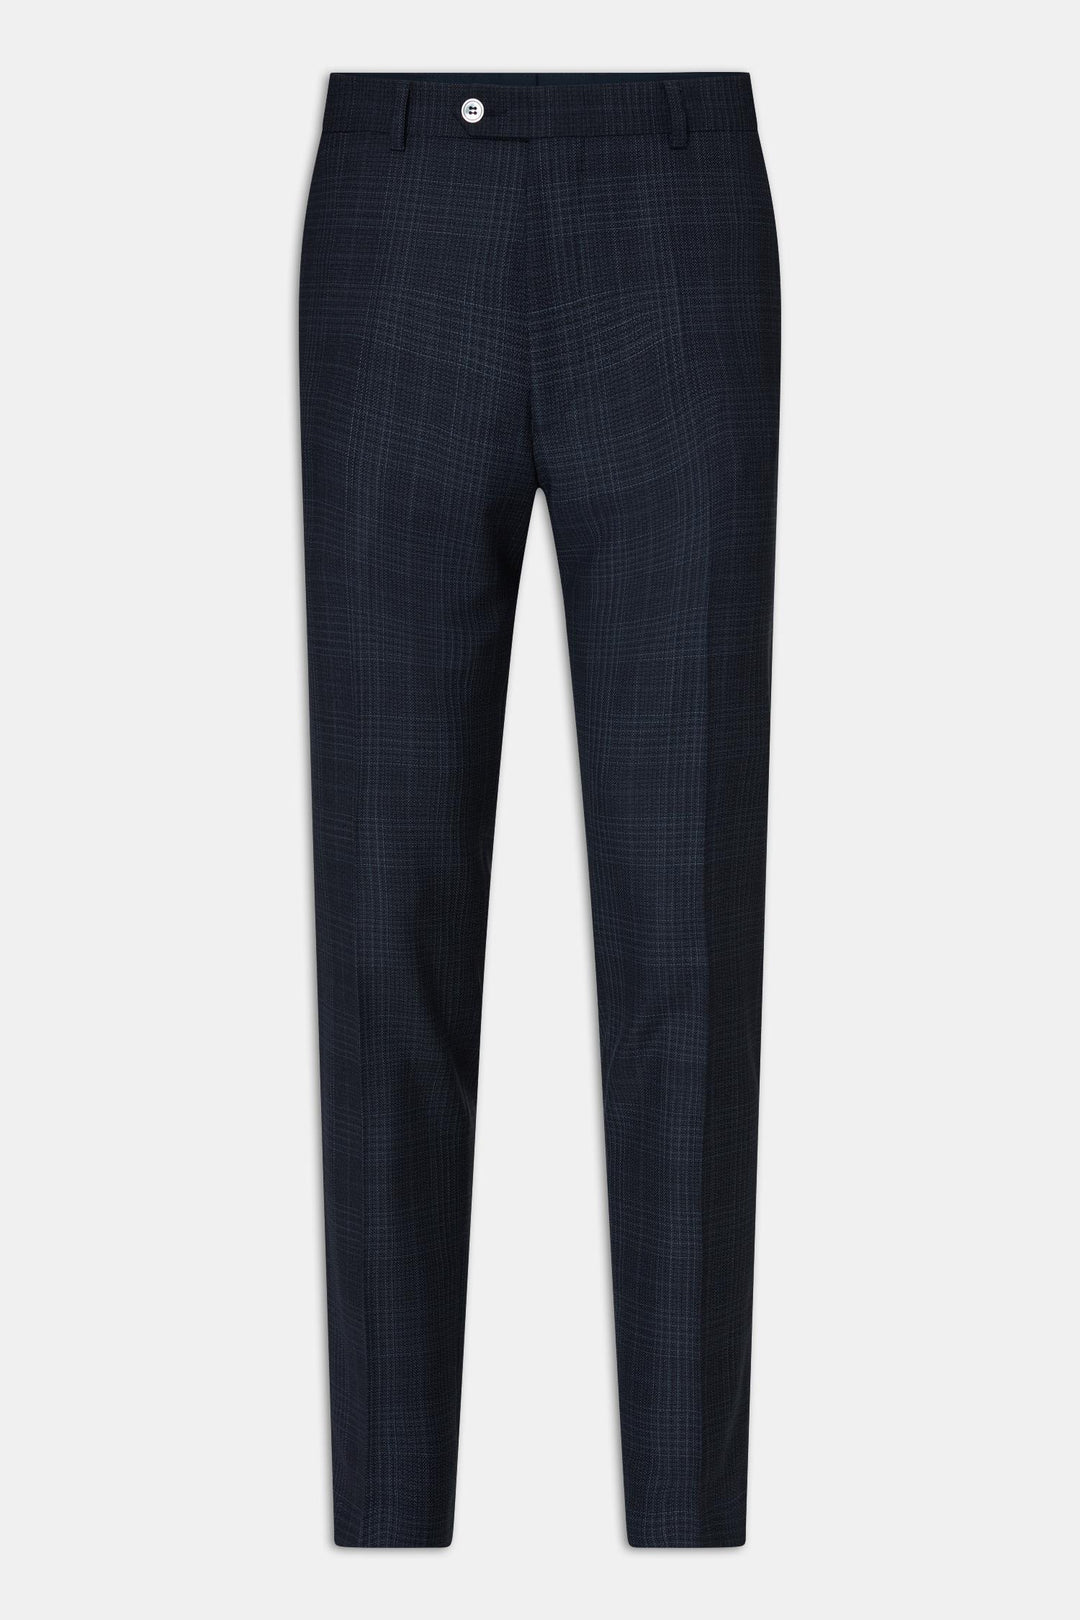 Denz Check Trousers